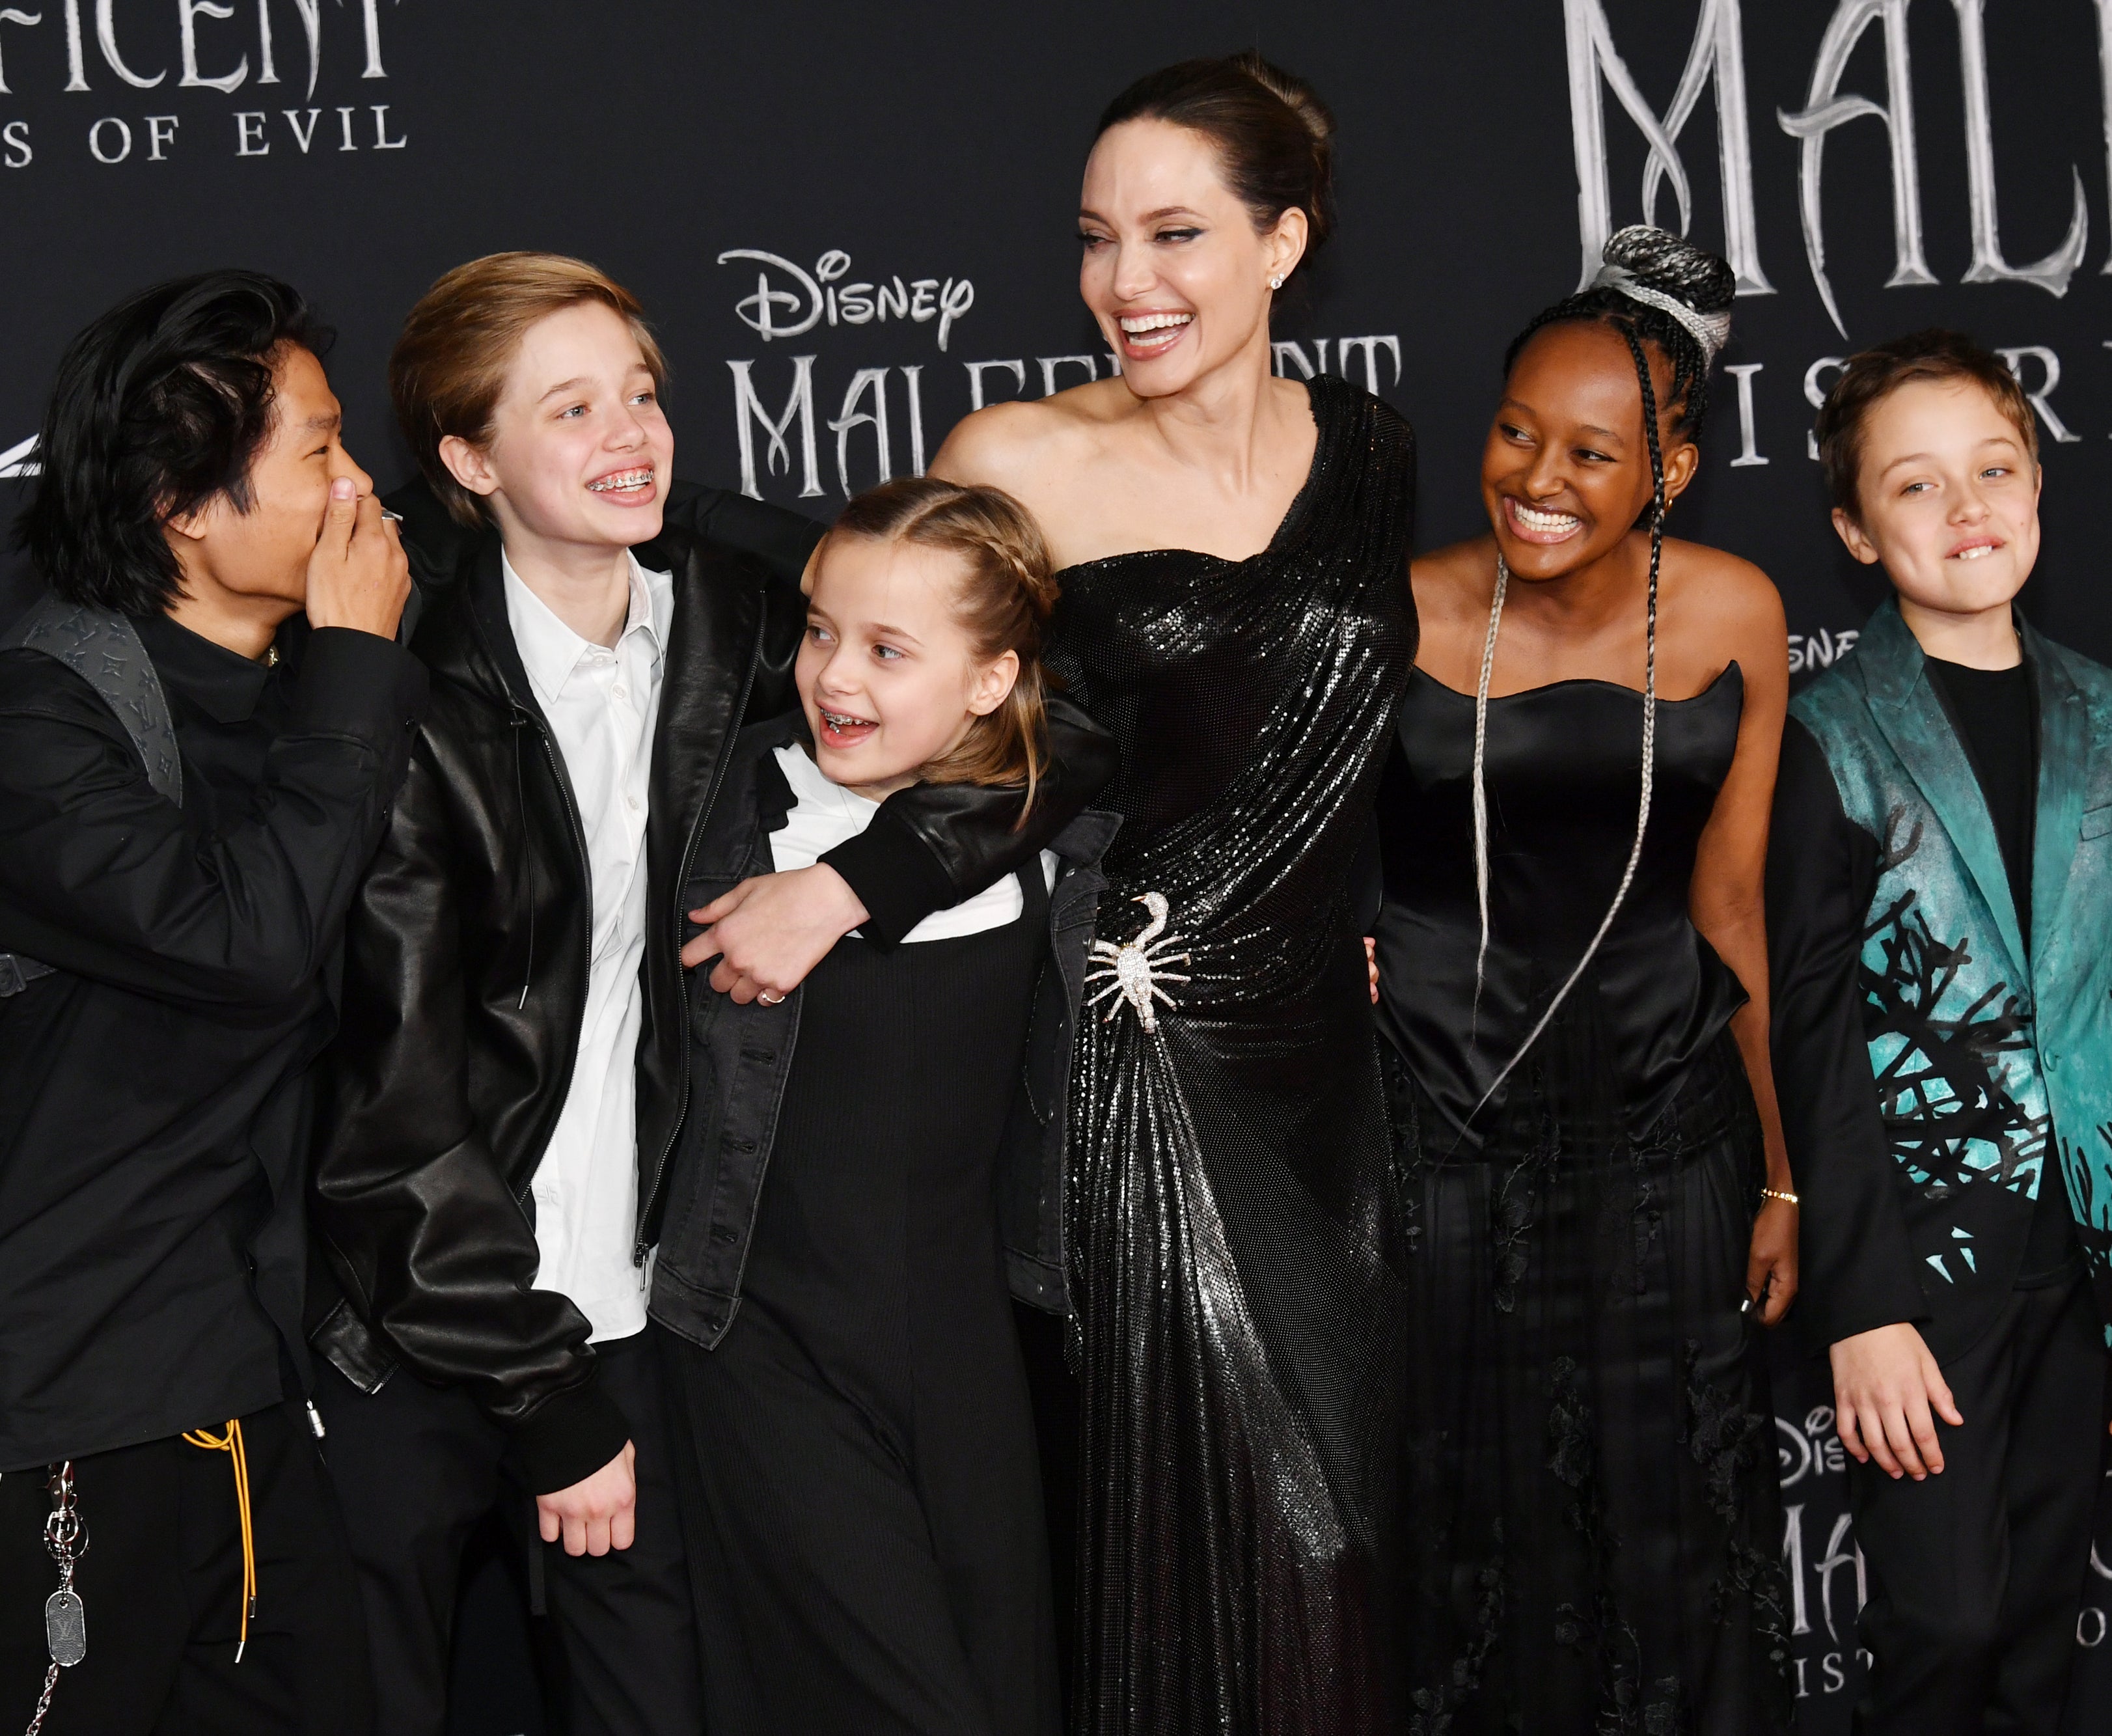 Angelina and her kids at a movie premiere